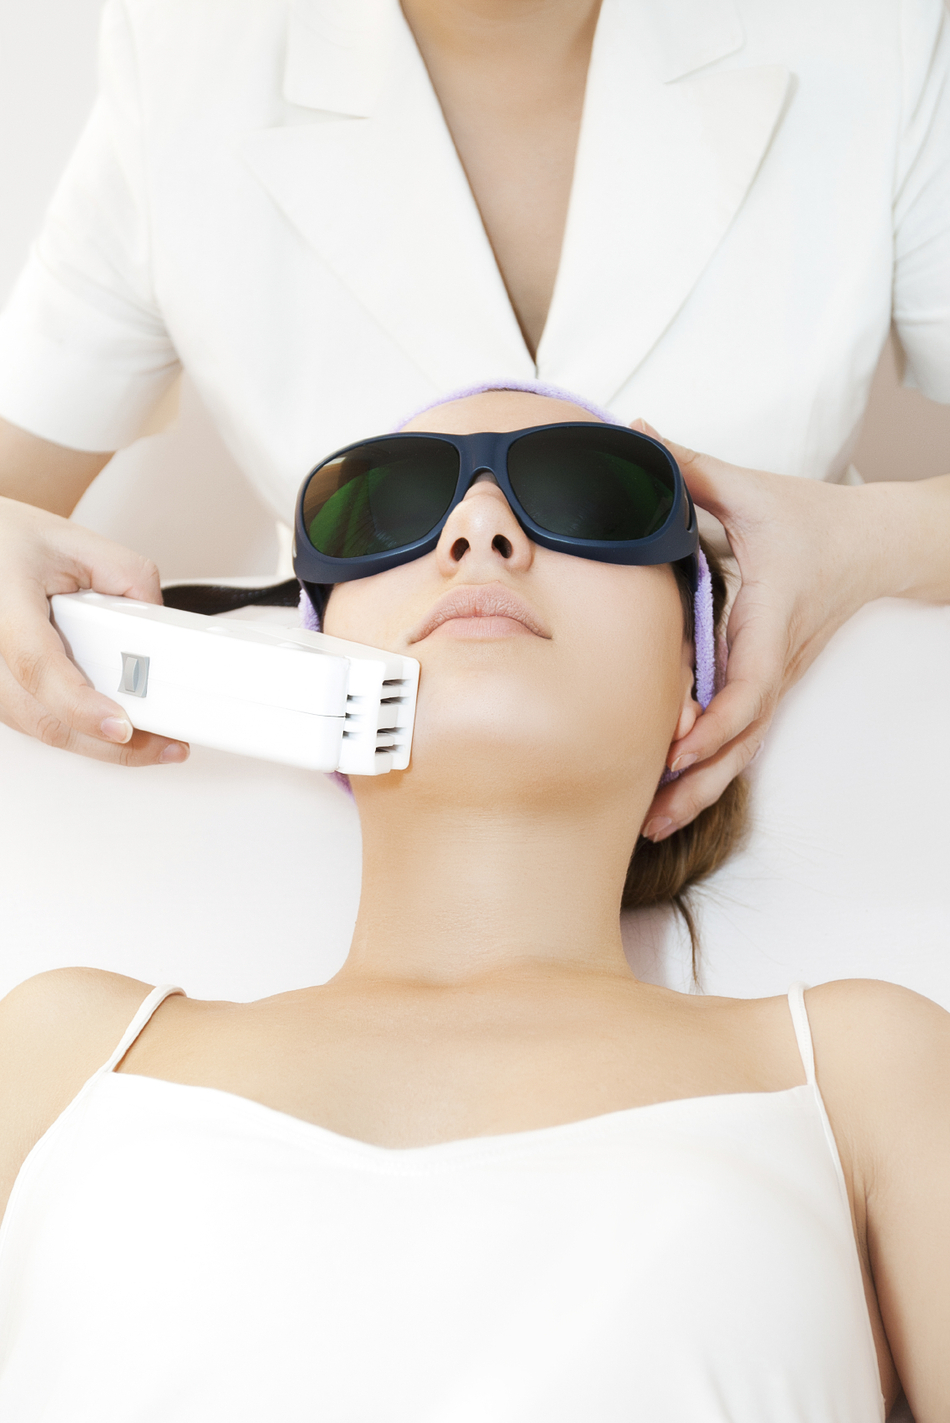 How Laser Therapy Could Help Your Skin Troubles